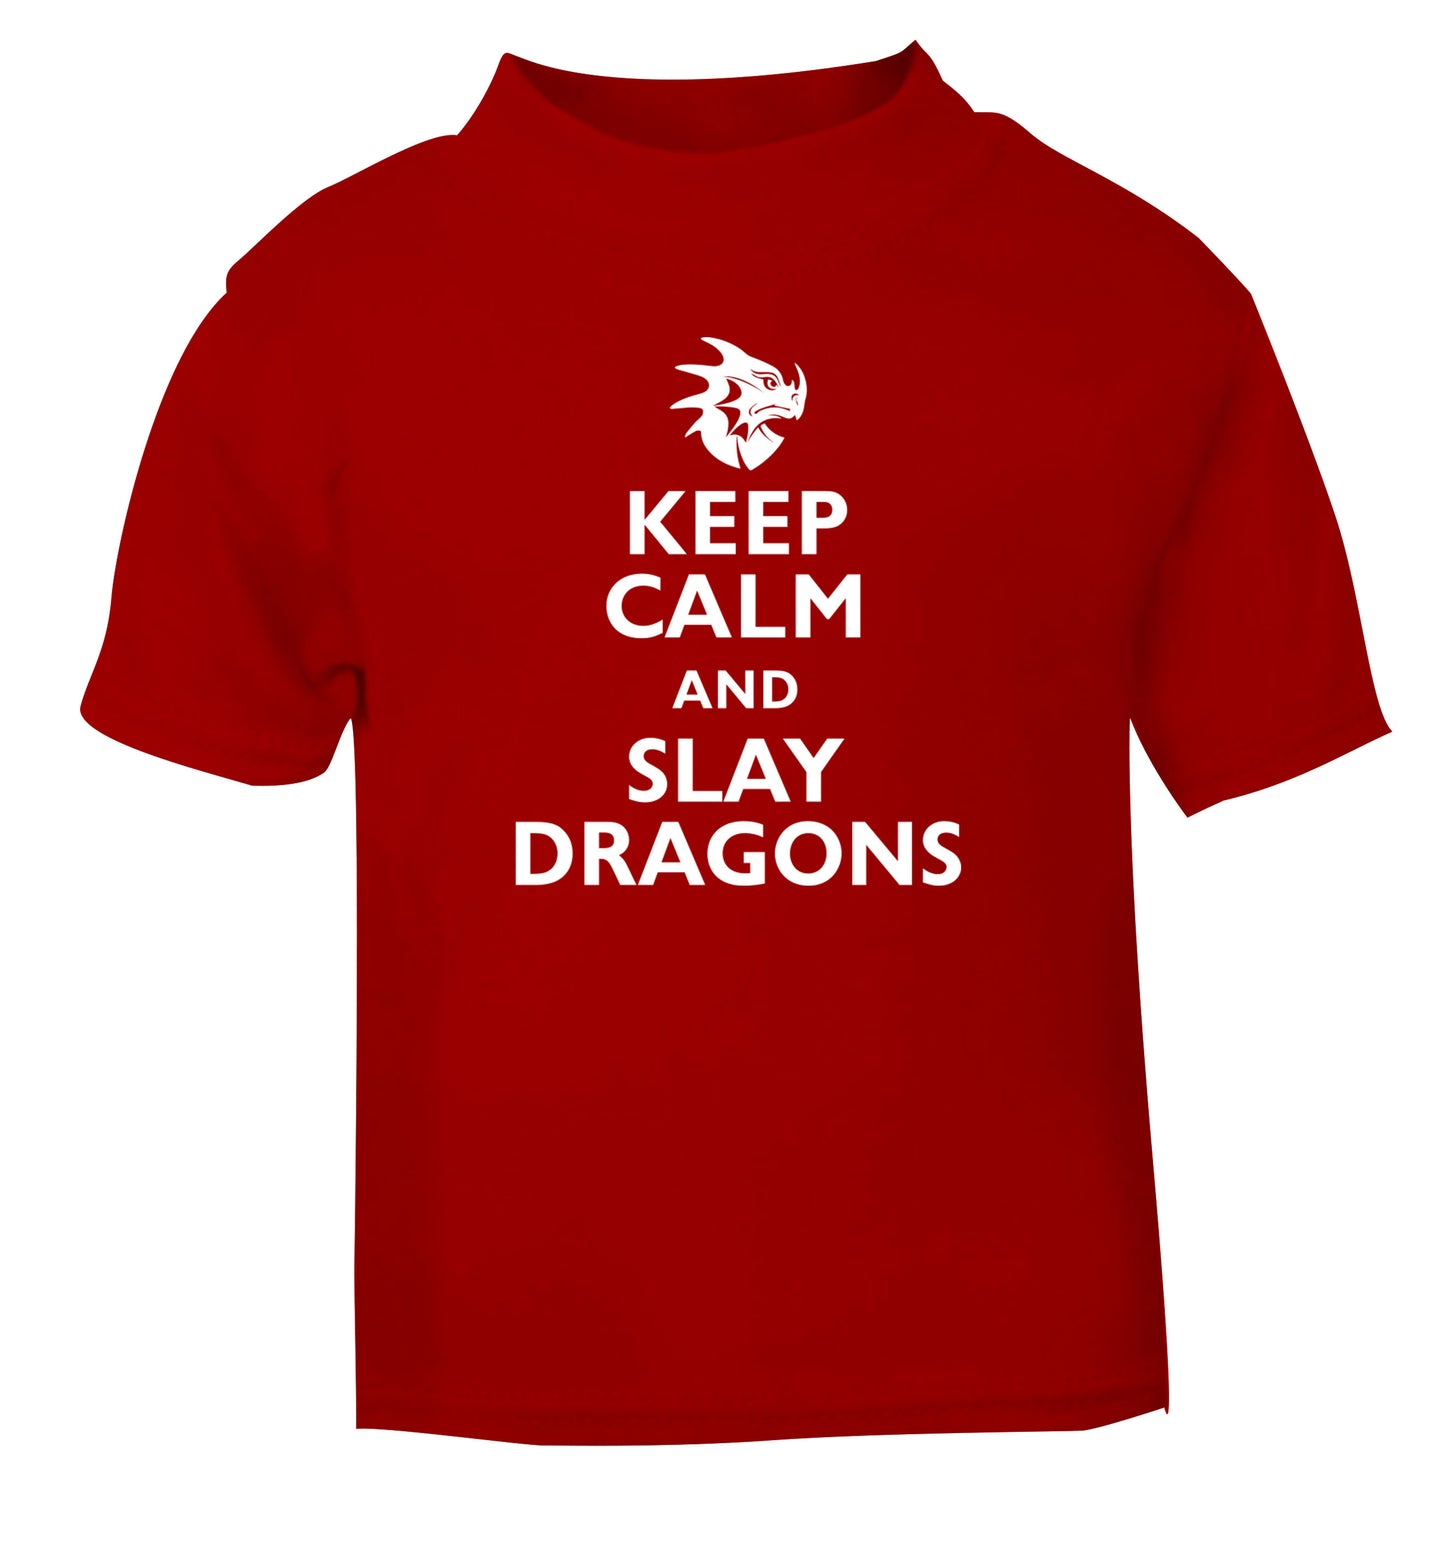 Keep calm and slay dragons red Baby Toddler Tshirt 2 Years